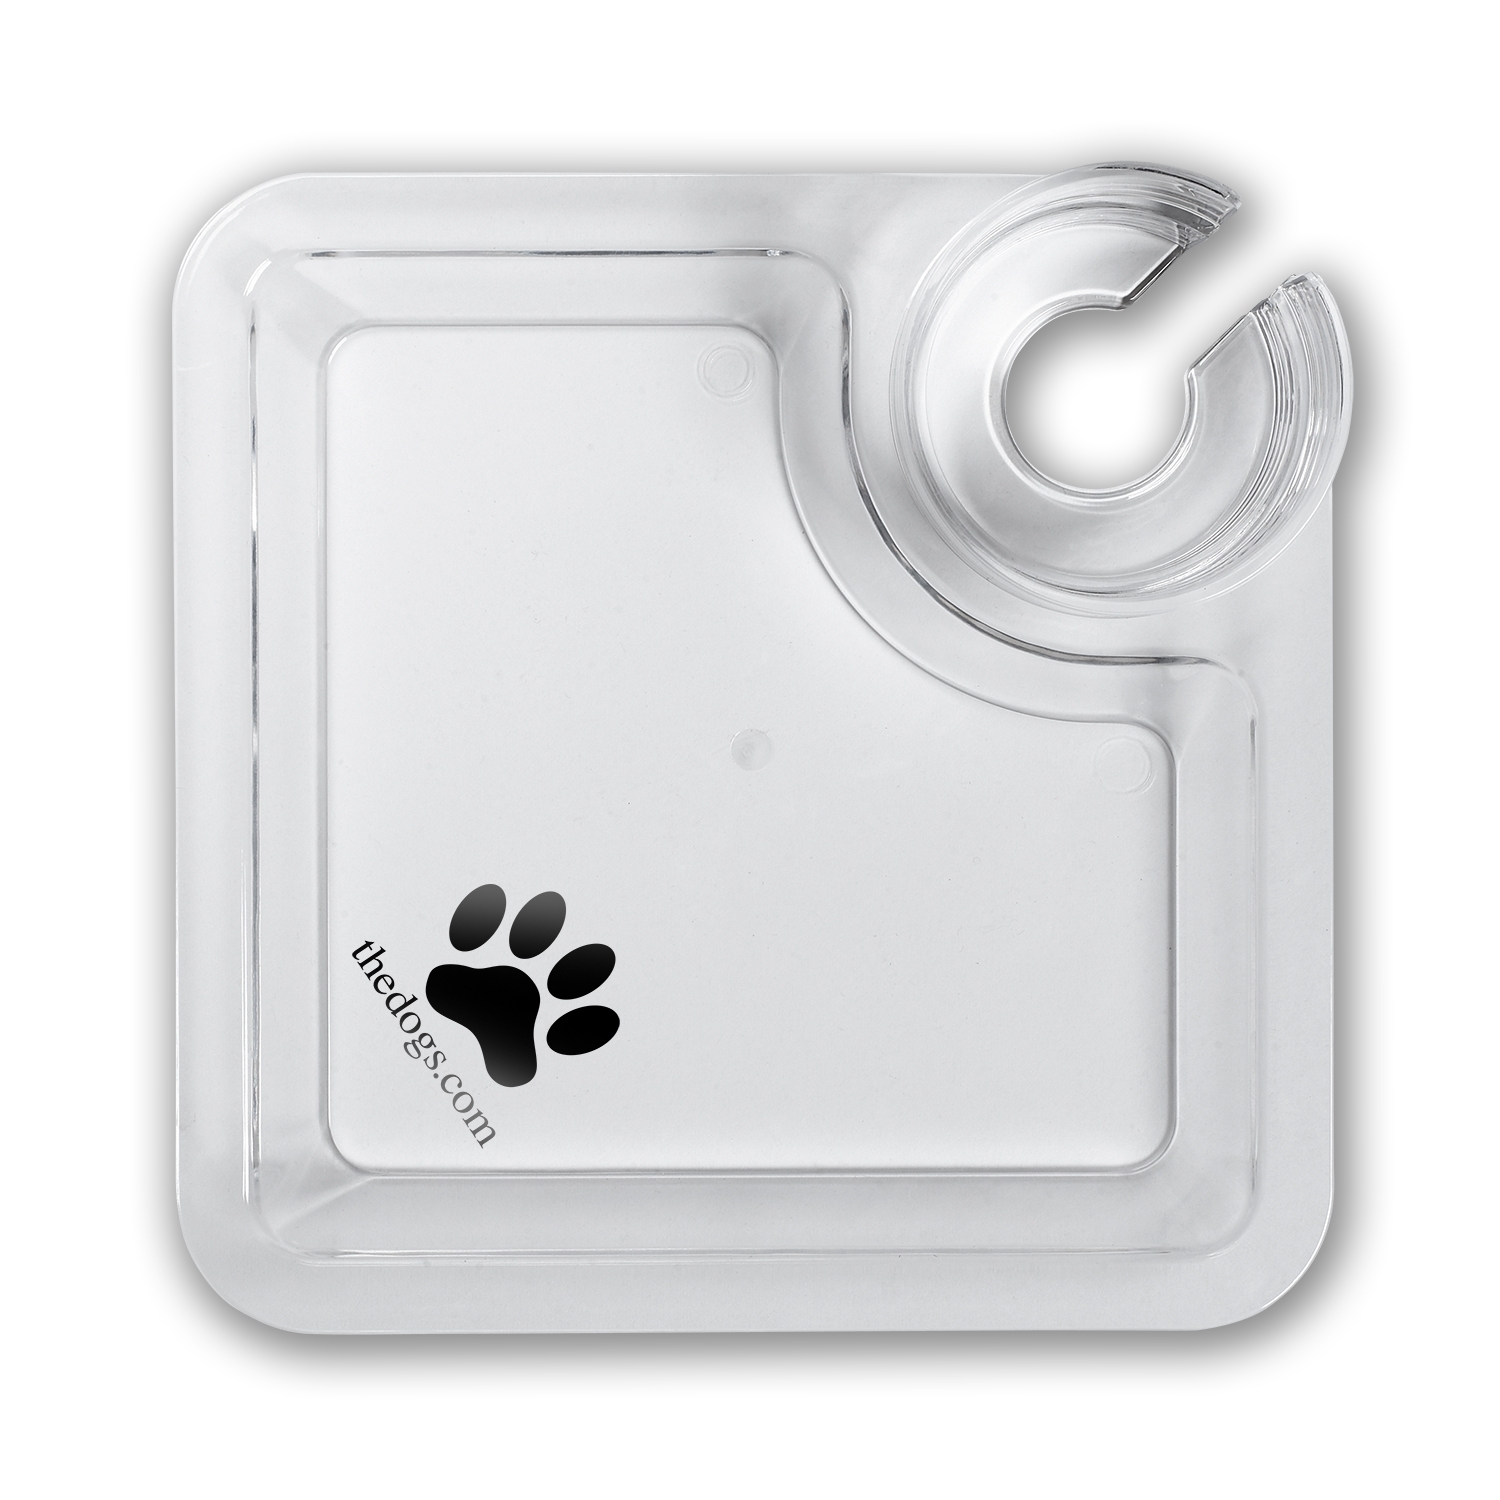 thedogs_clear_handyplate.jpg